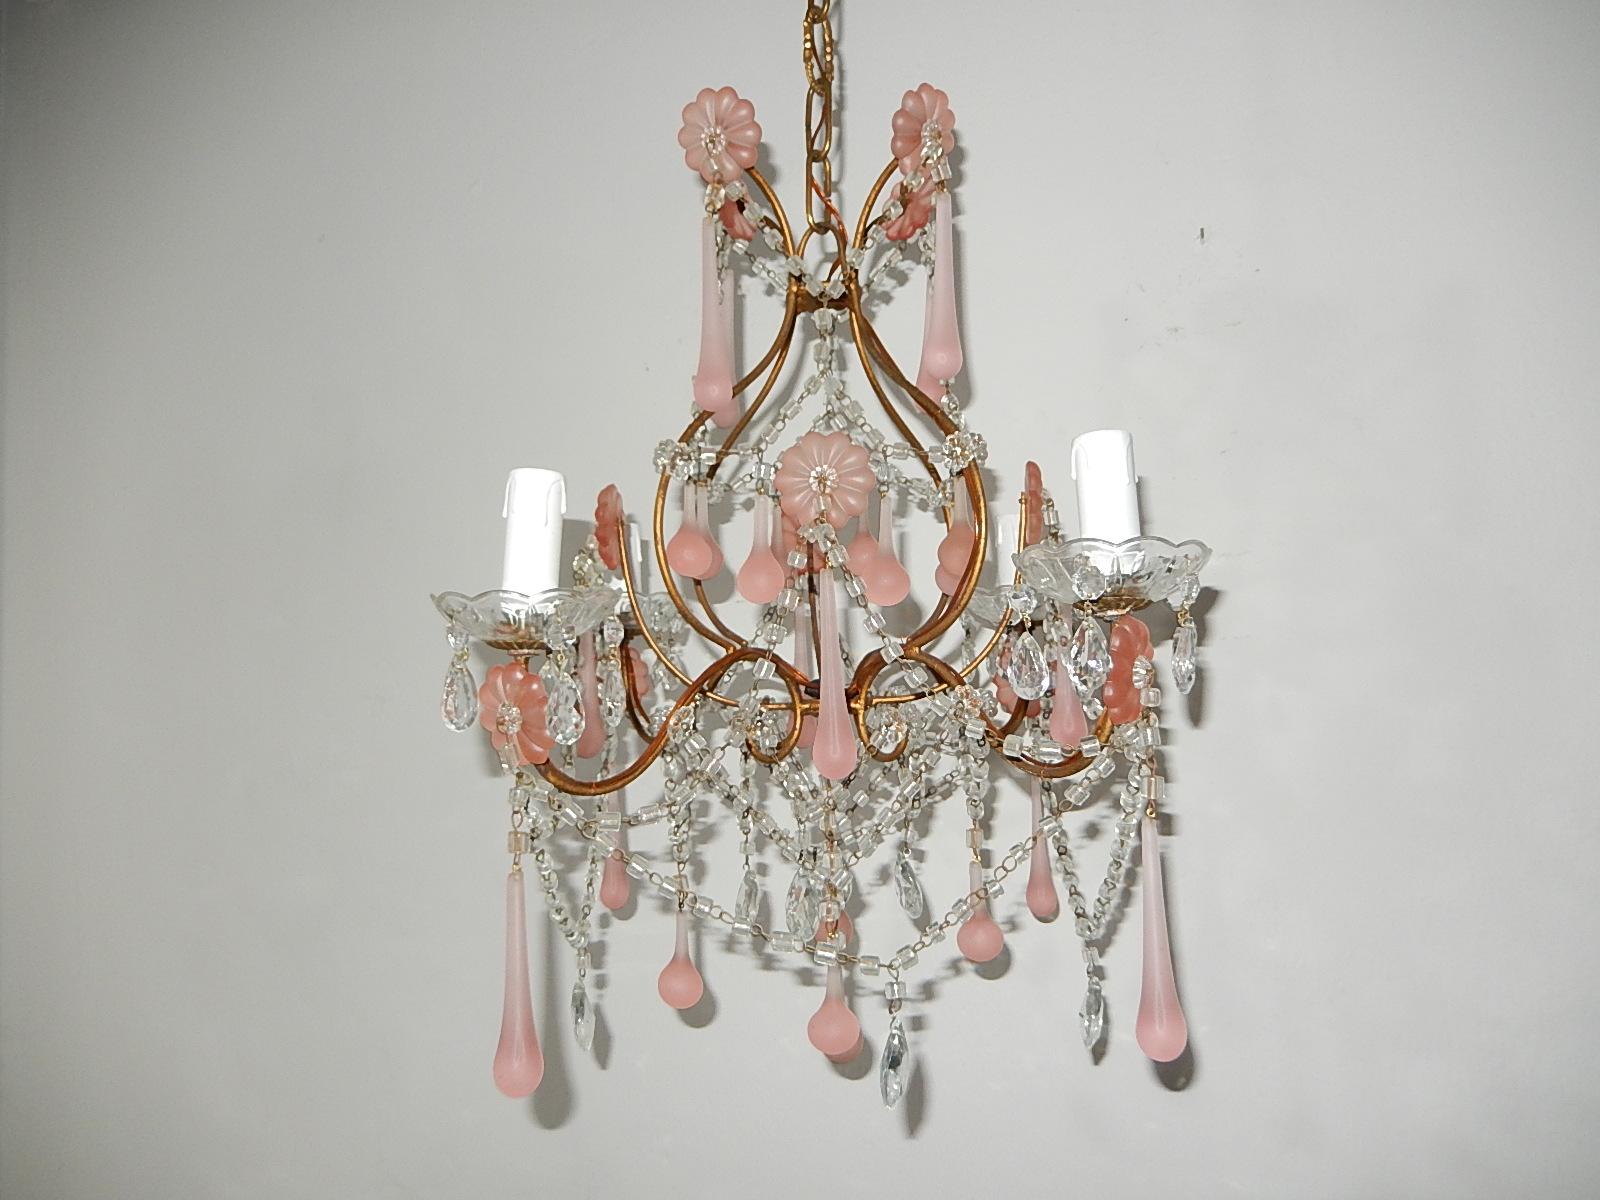 Housing four-light, sitting in crystal bobeches, dripping with vintage crystal prisms. Re-wired and ready to hang. Adorning fogged pink huge florets, matching Murano drops in two sizes, clear prisms with swags of macaroni beads and florets